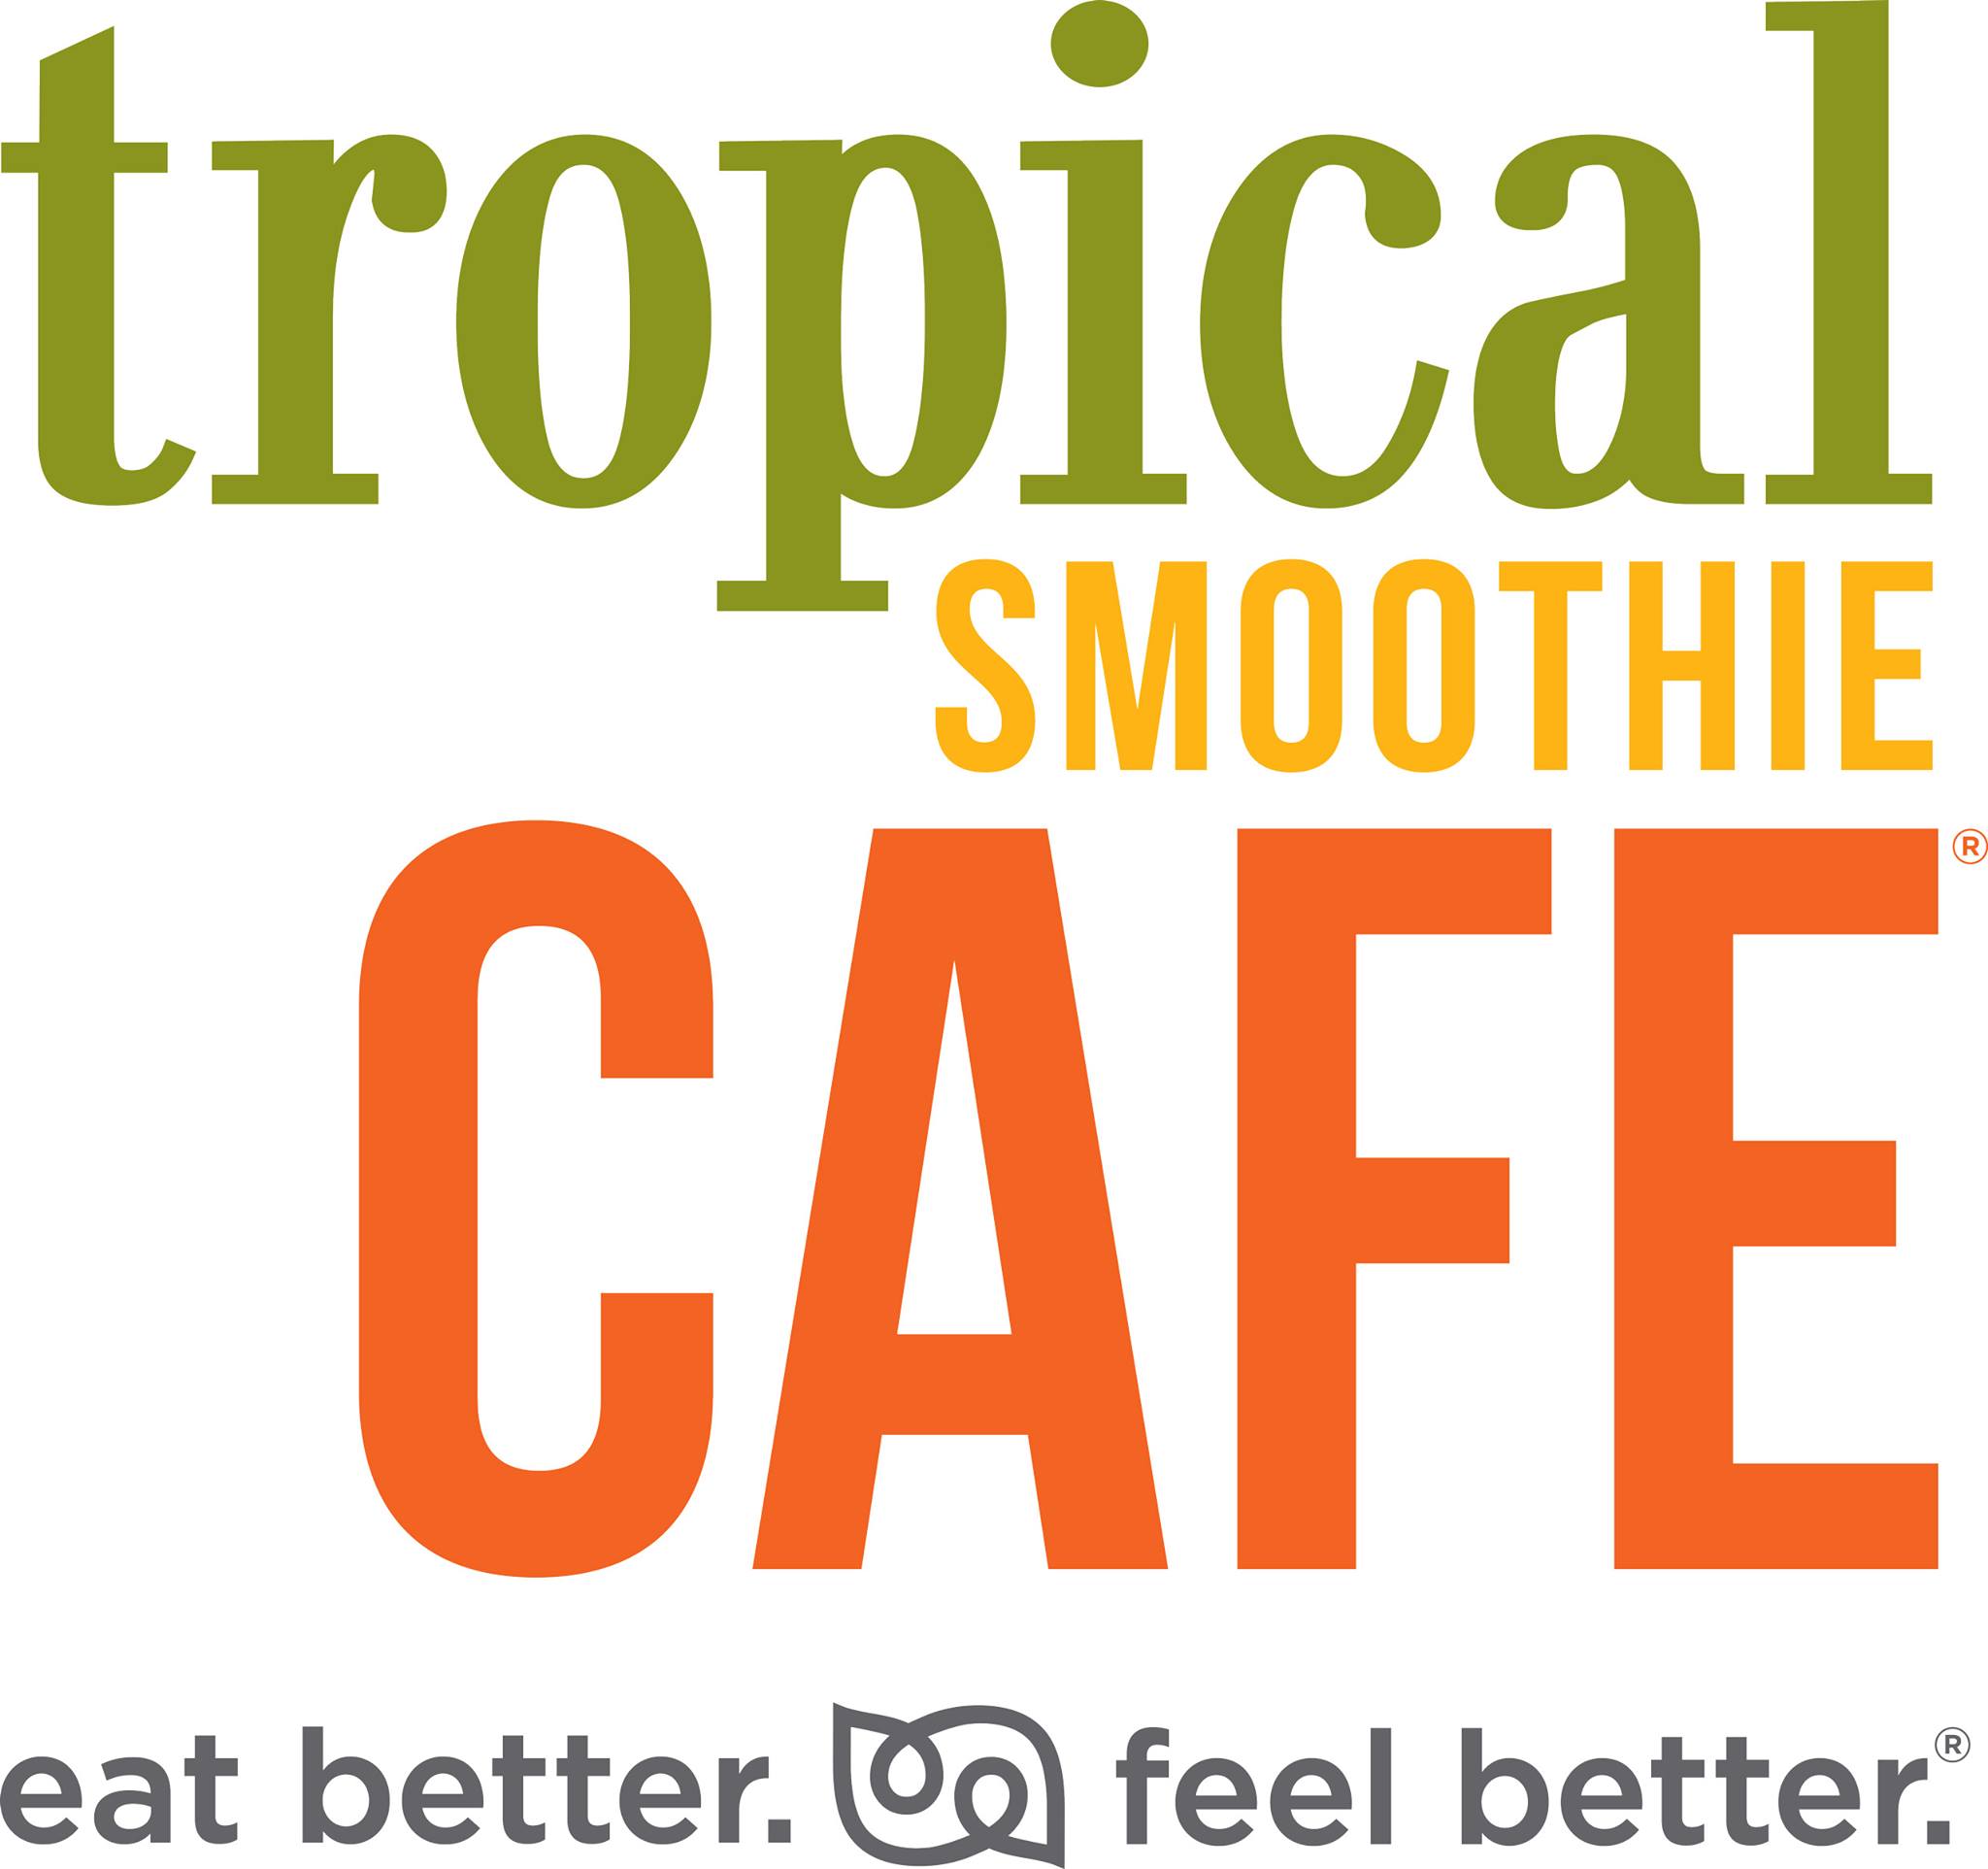 Tropical Smoothie CafÃ© Opens in Paoli, PA